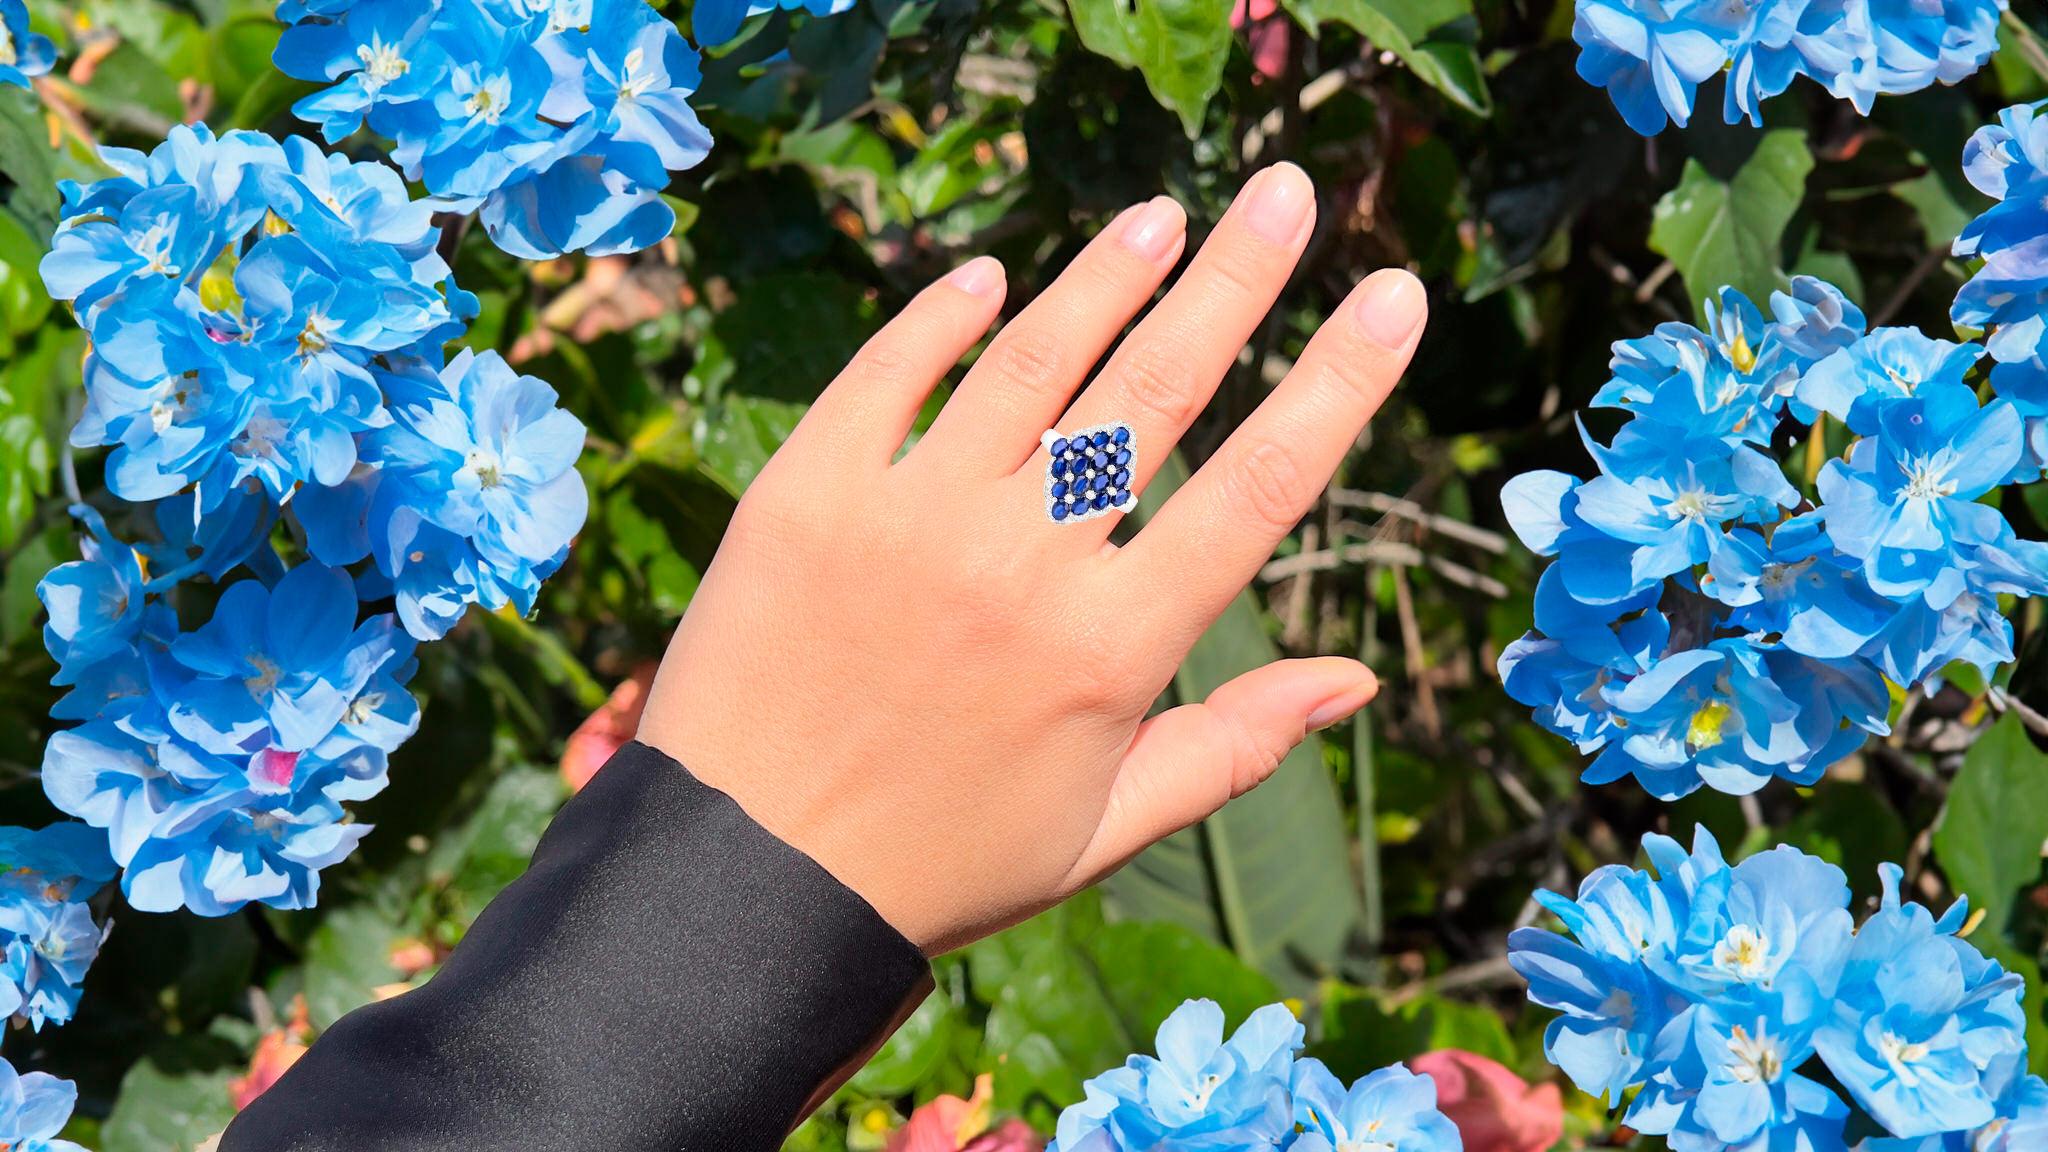 It comes with the Gemological Appraisal by GIA GG/AJP
Blue Sapphires are natural in origin
White Zircons are synthetic in origin
16 Blue Sapphires = 3.20 Carats
55 White Zircons = 0.29 Carats
Metal: Rhodium Plated Sterling Silver
Ring Size: 7*